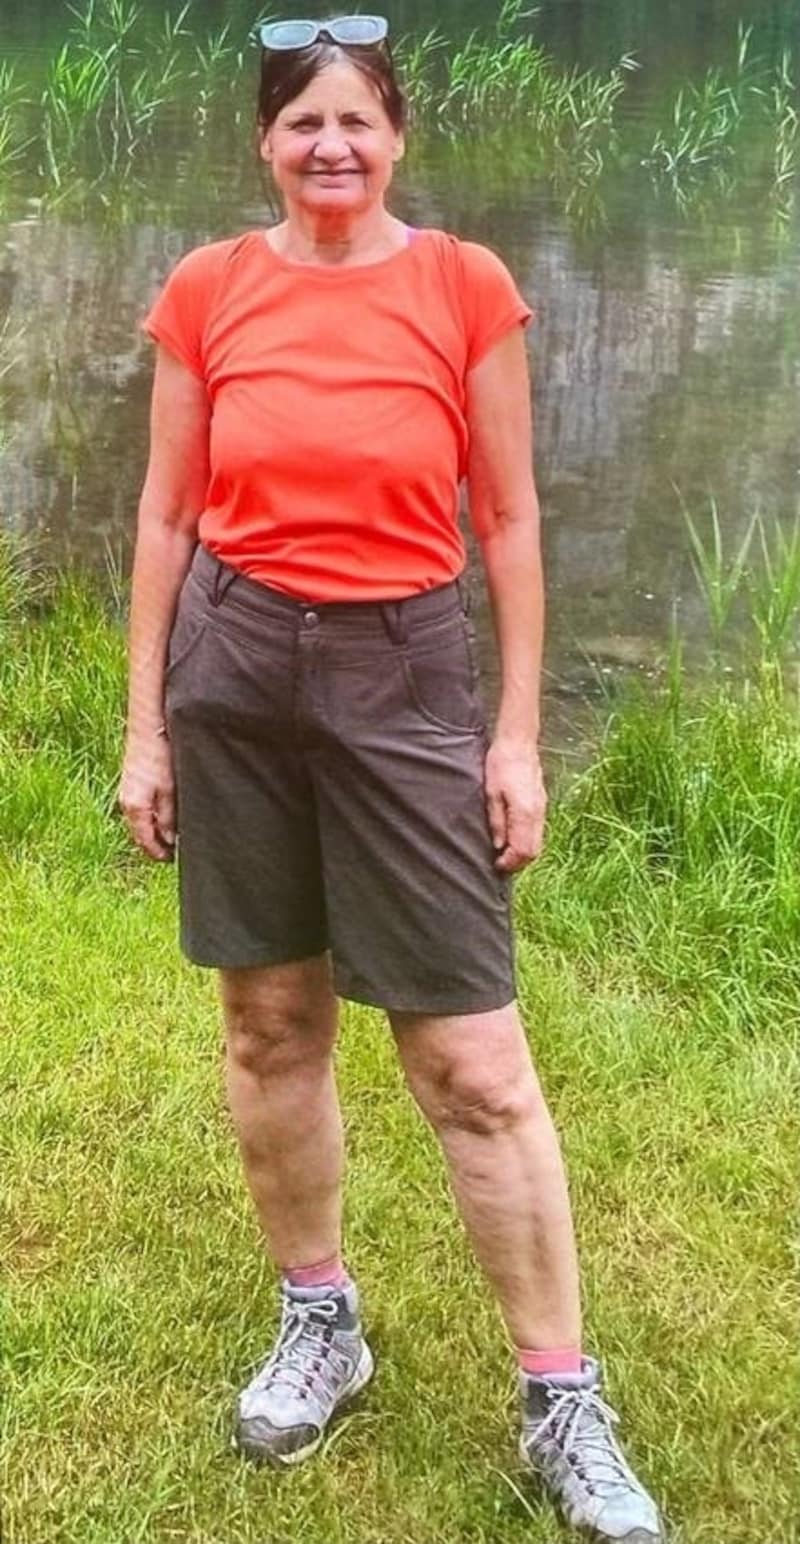 Who has any information about 64-year-old Helga W.? The police have published this picture and are asking for tips. (Bild: privat)